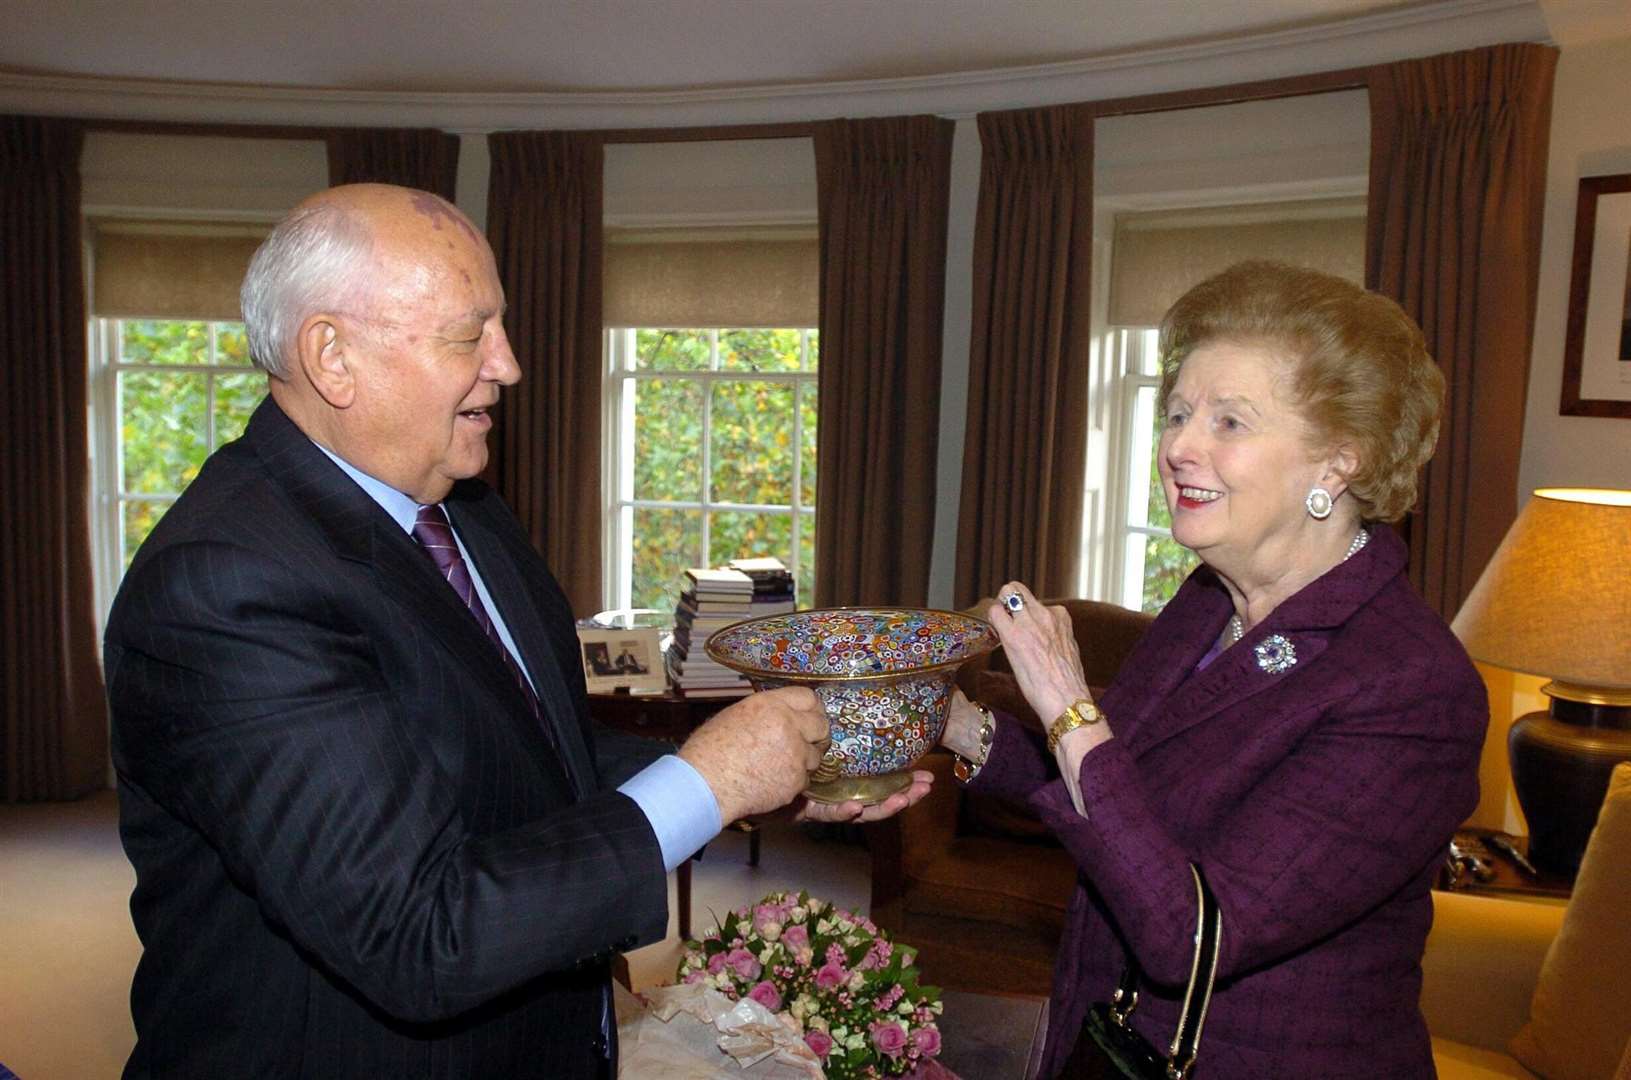 Mikhail Gorbachev presents Lady Thatcher with glass bowl at a meeting in October 2005 (Michael Stephens/PA)